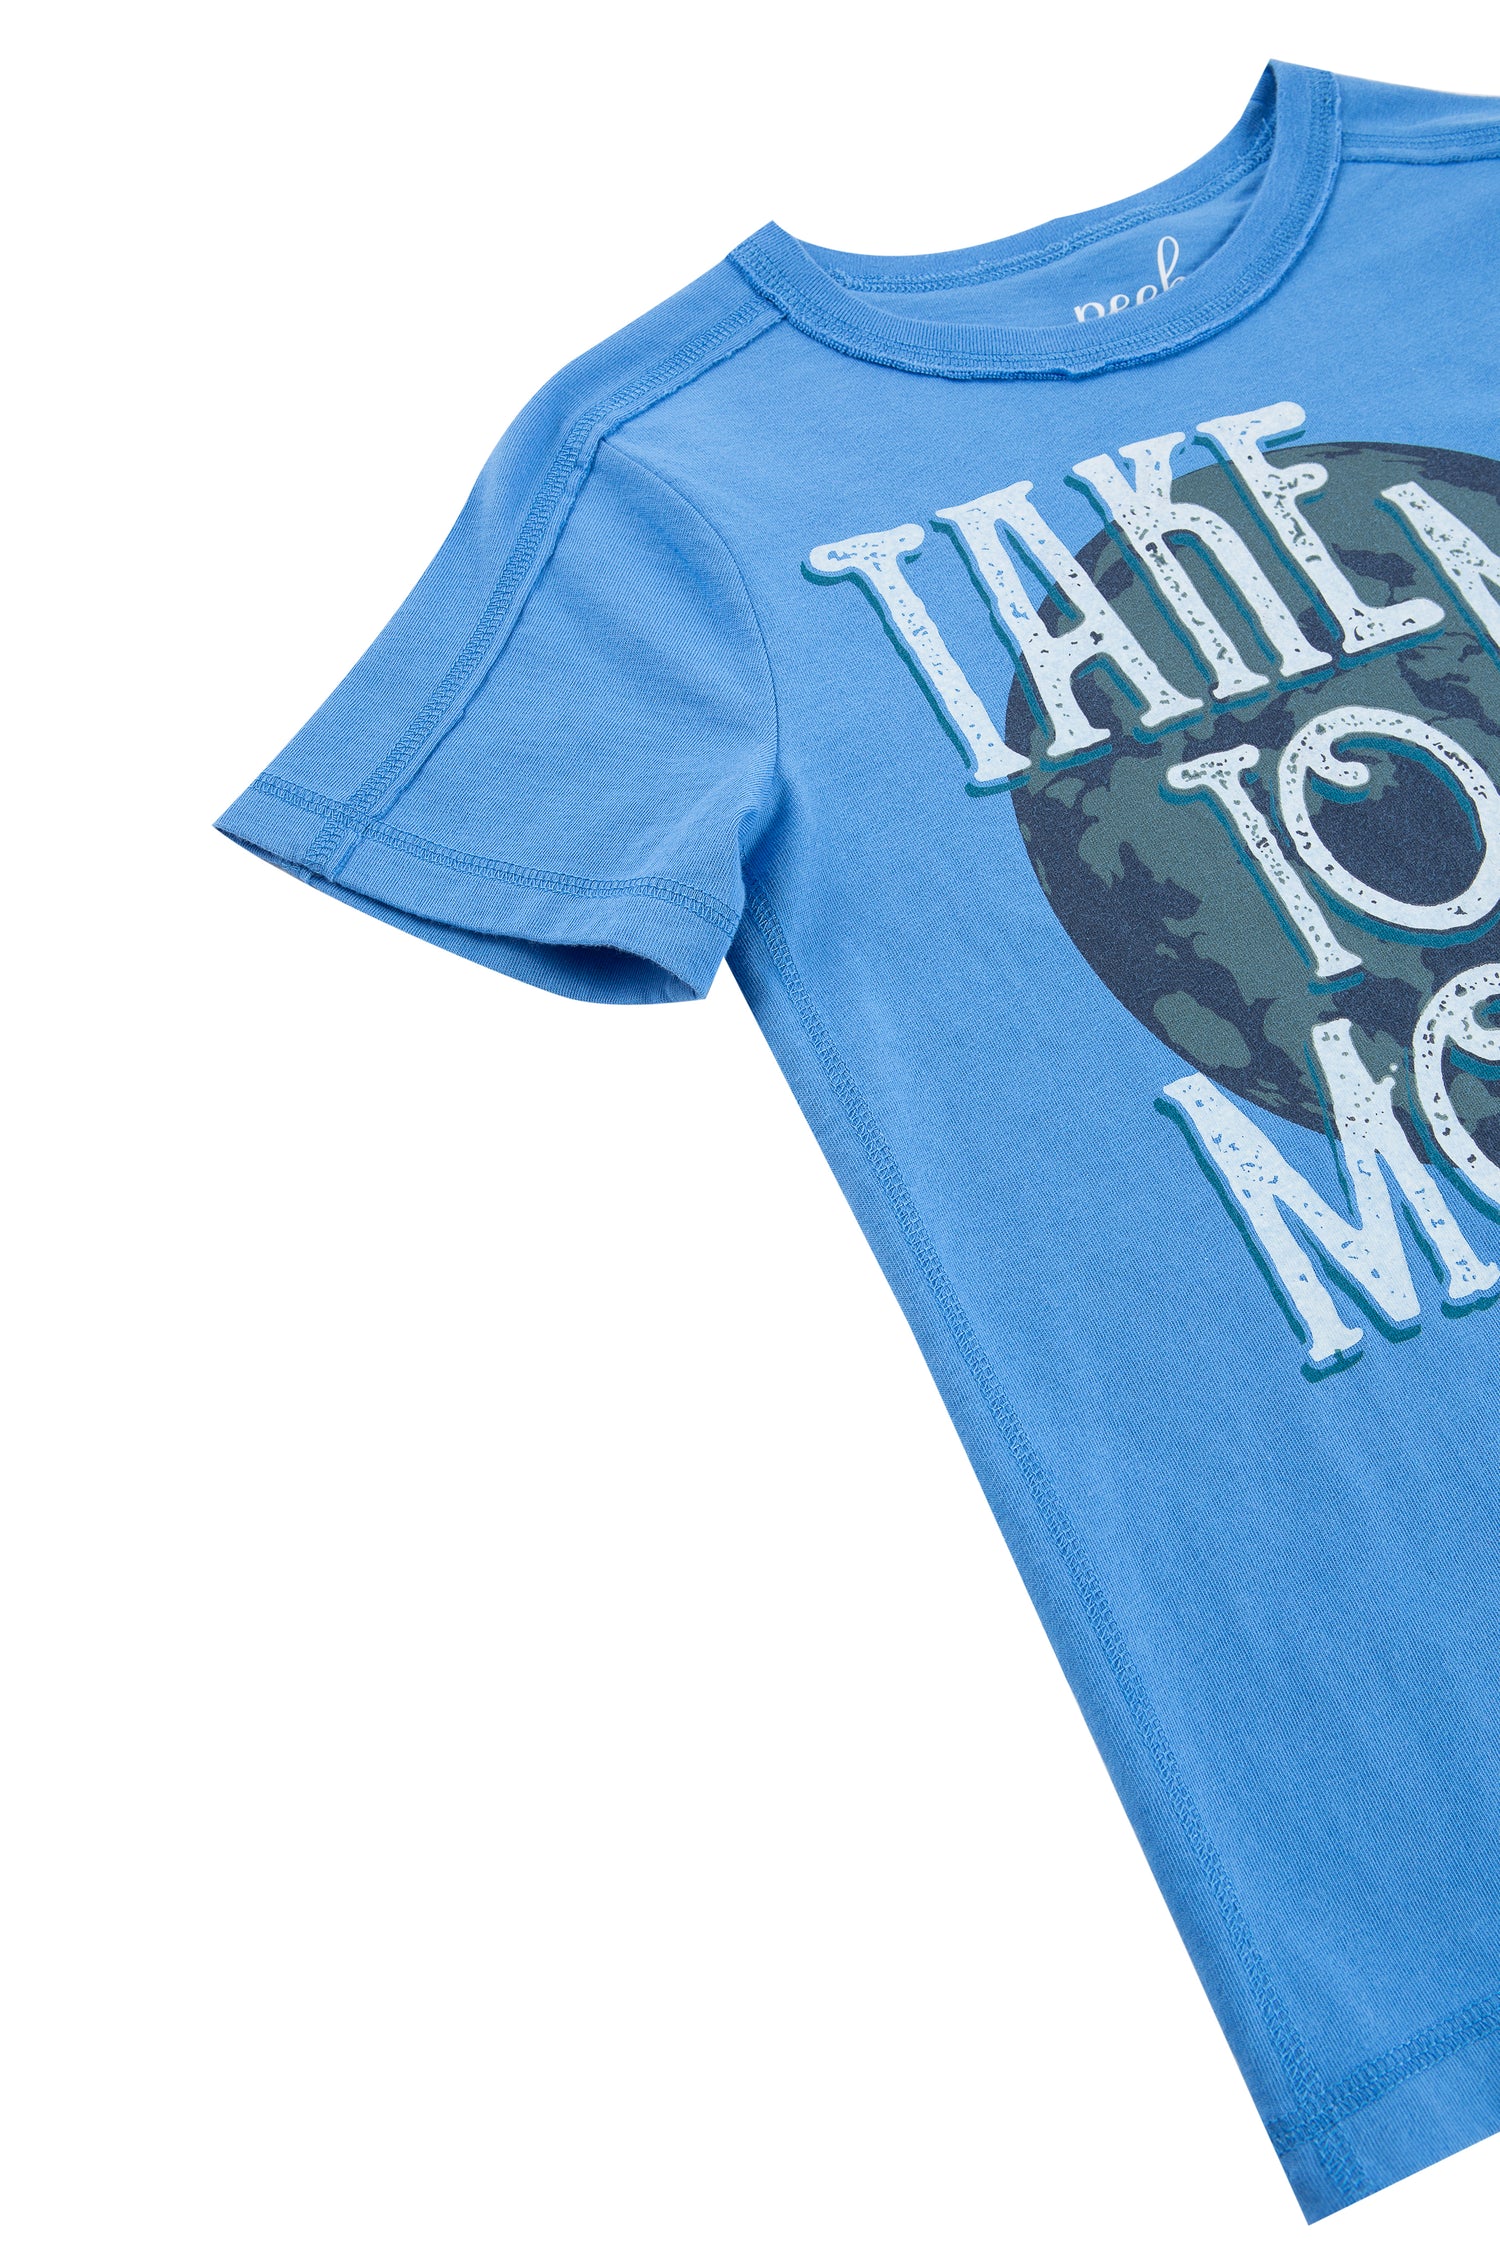 CLOSE UP OF BLUE T-SHIRT WITH "TAKE ME TO THE MOON"